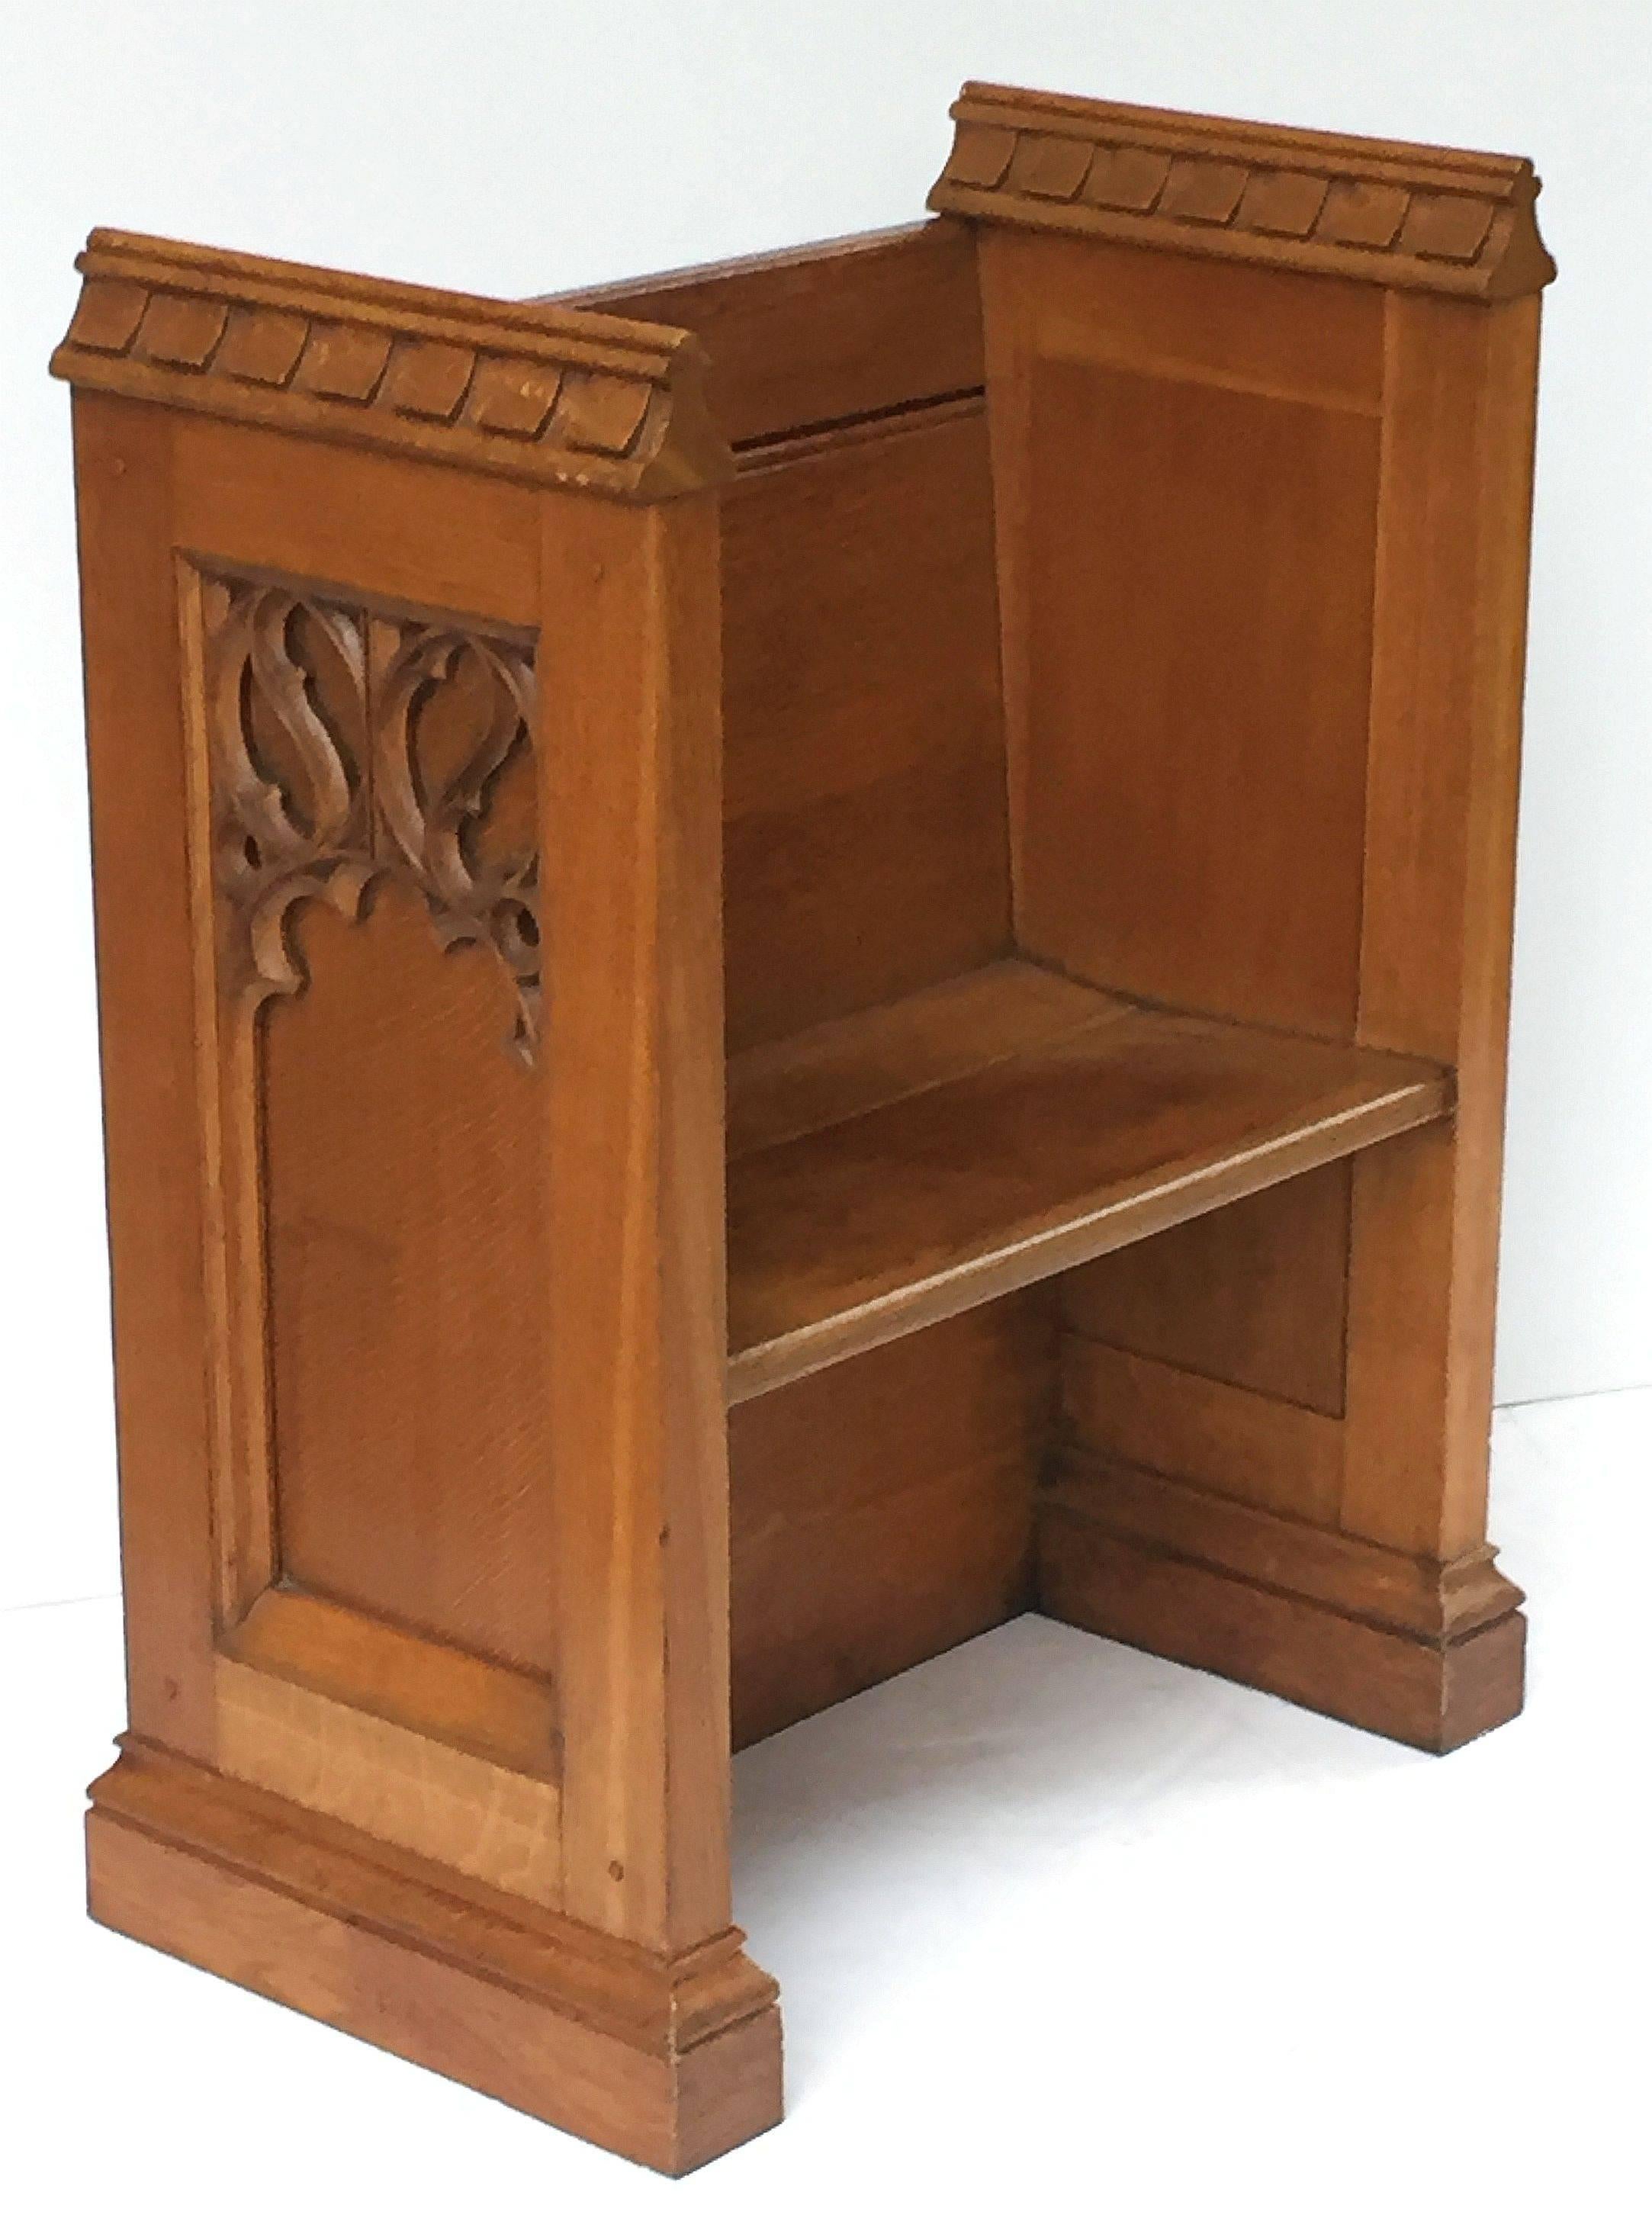 A handsome large English ecclesiastical prayer bench (seat) or pew of oak in the Gothic style, featuring two sides panelled with carved Gothic designs of quatrefoils on one end and Tudor roses on the other, a bench seat and back, set upon a moulded